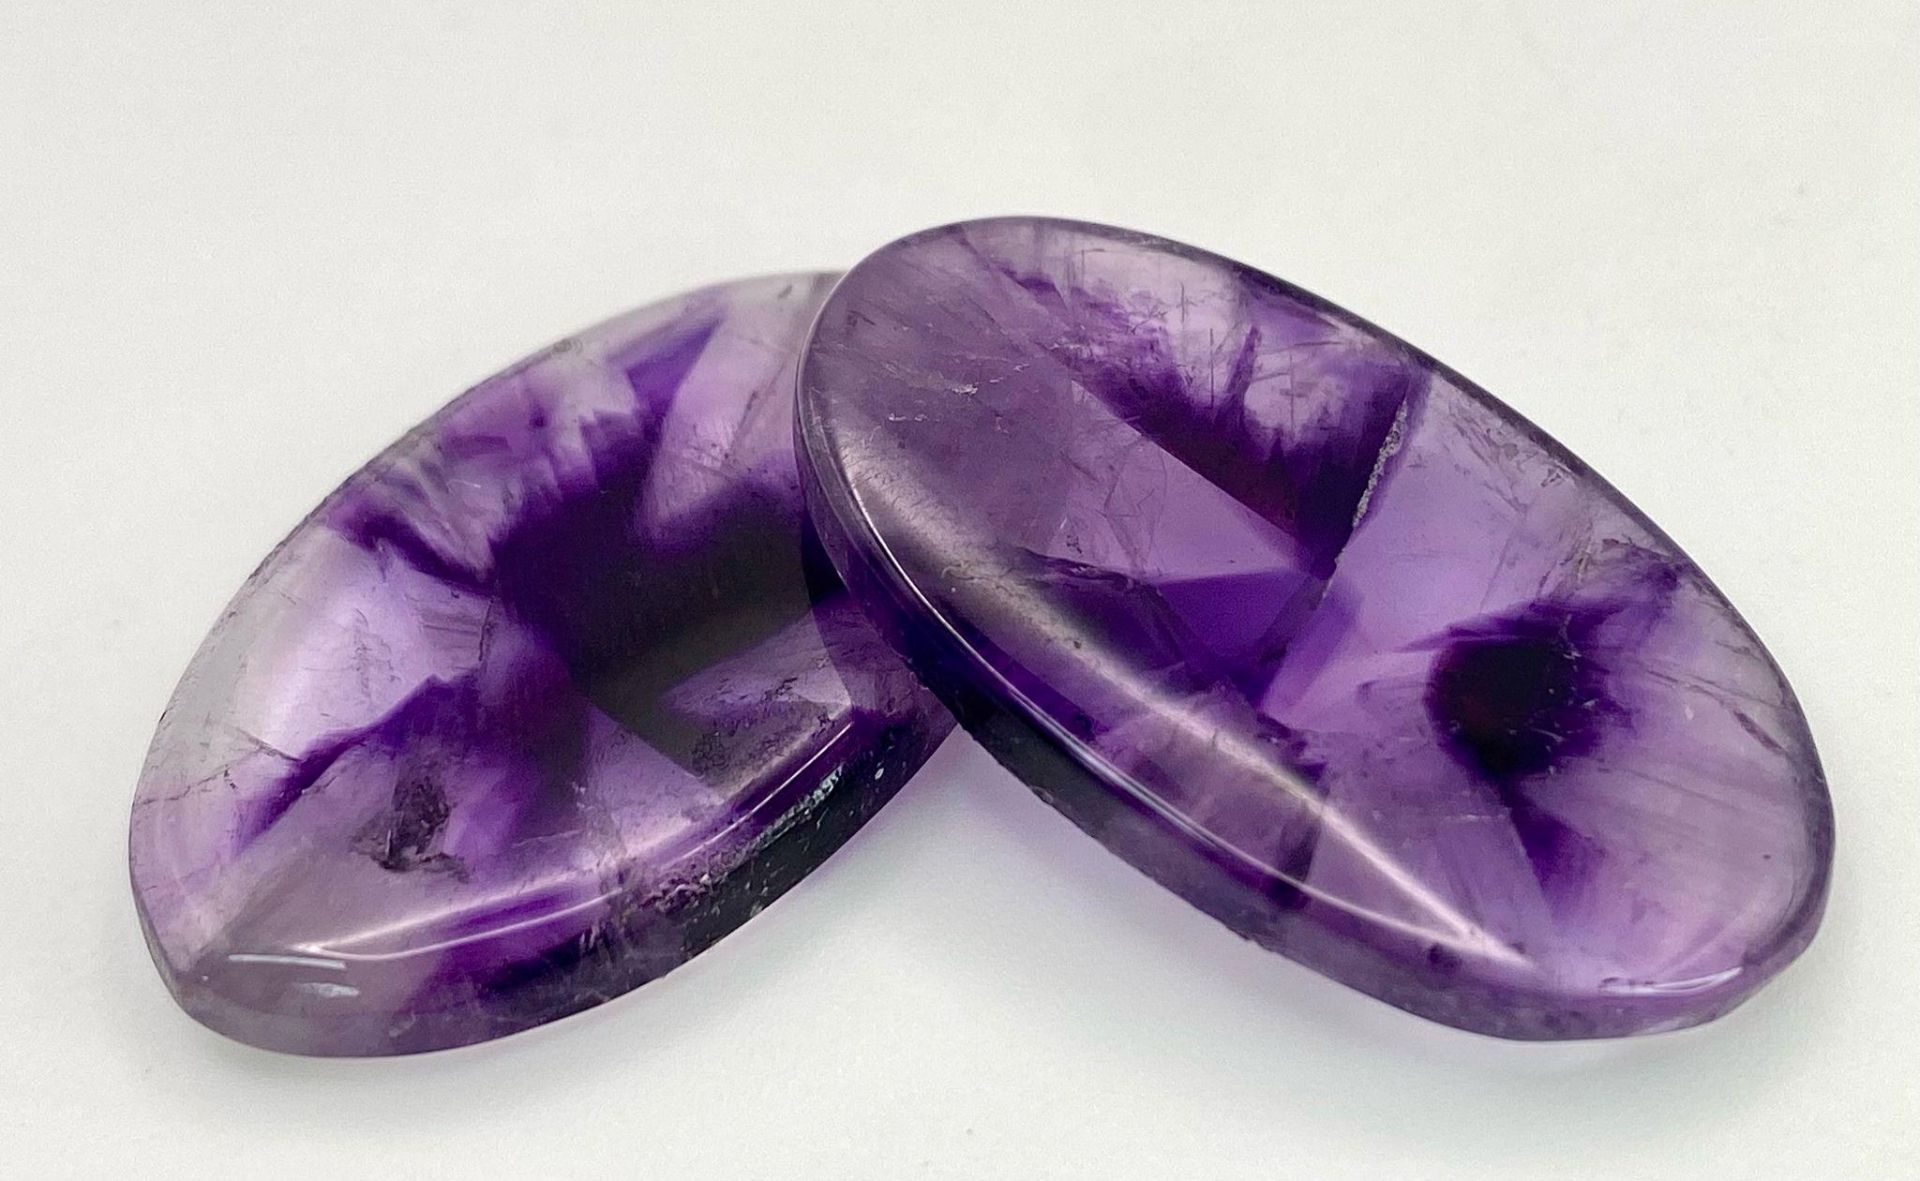 A rarely seen and very desirable pair of large AMETHYST cabochons, exhibiting radiating banded